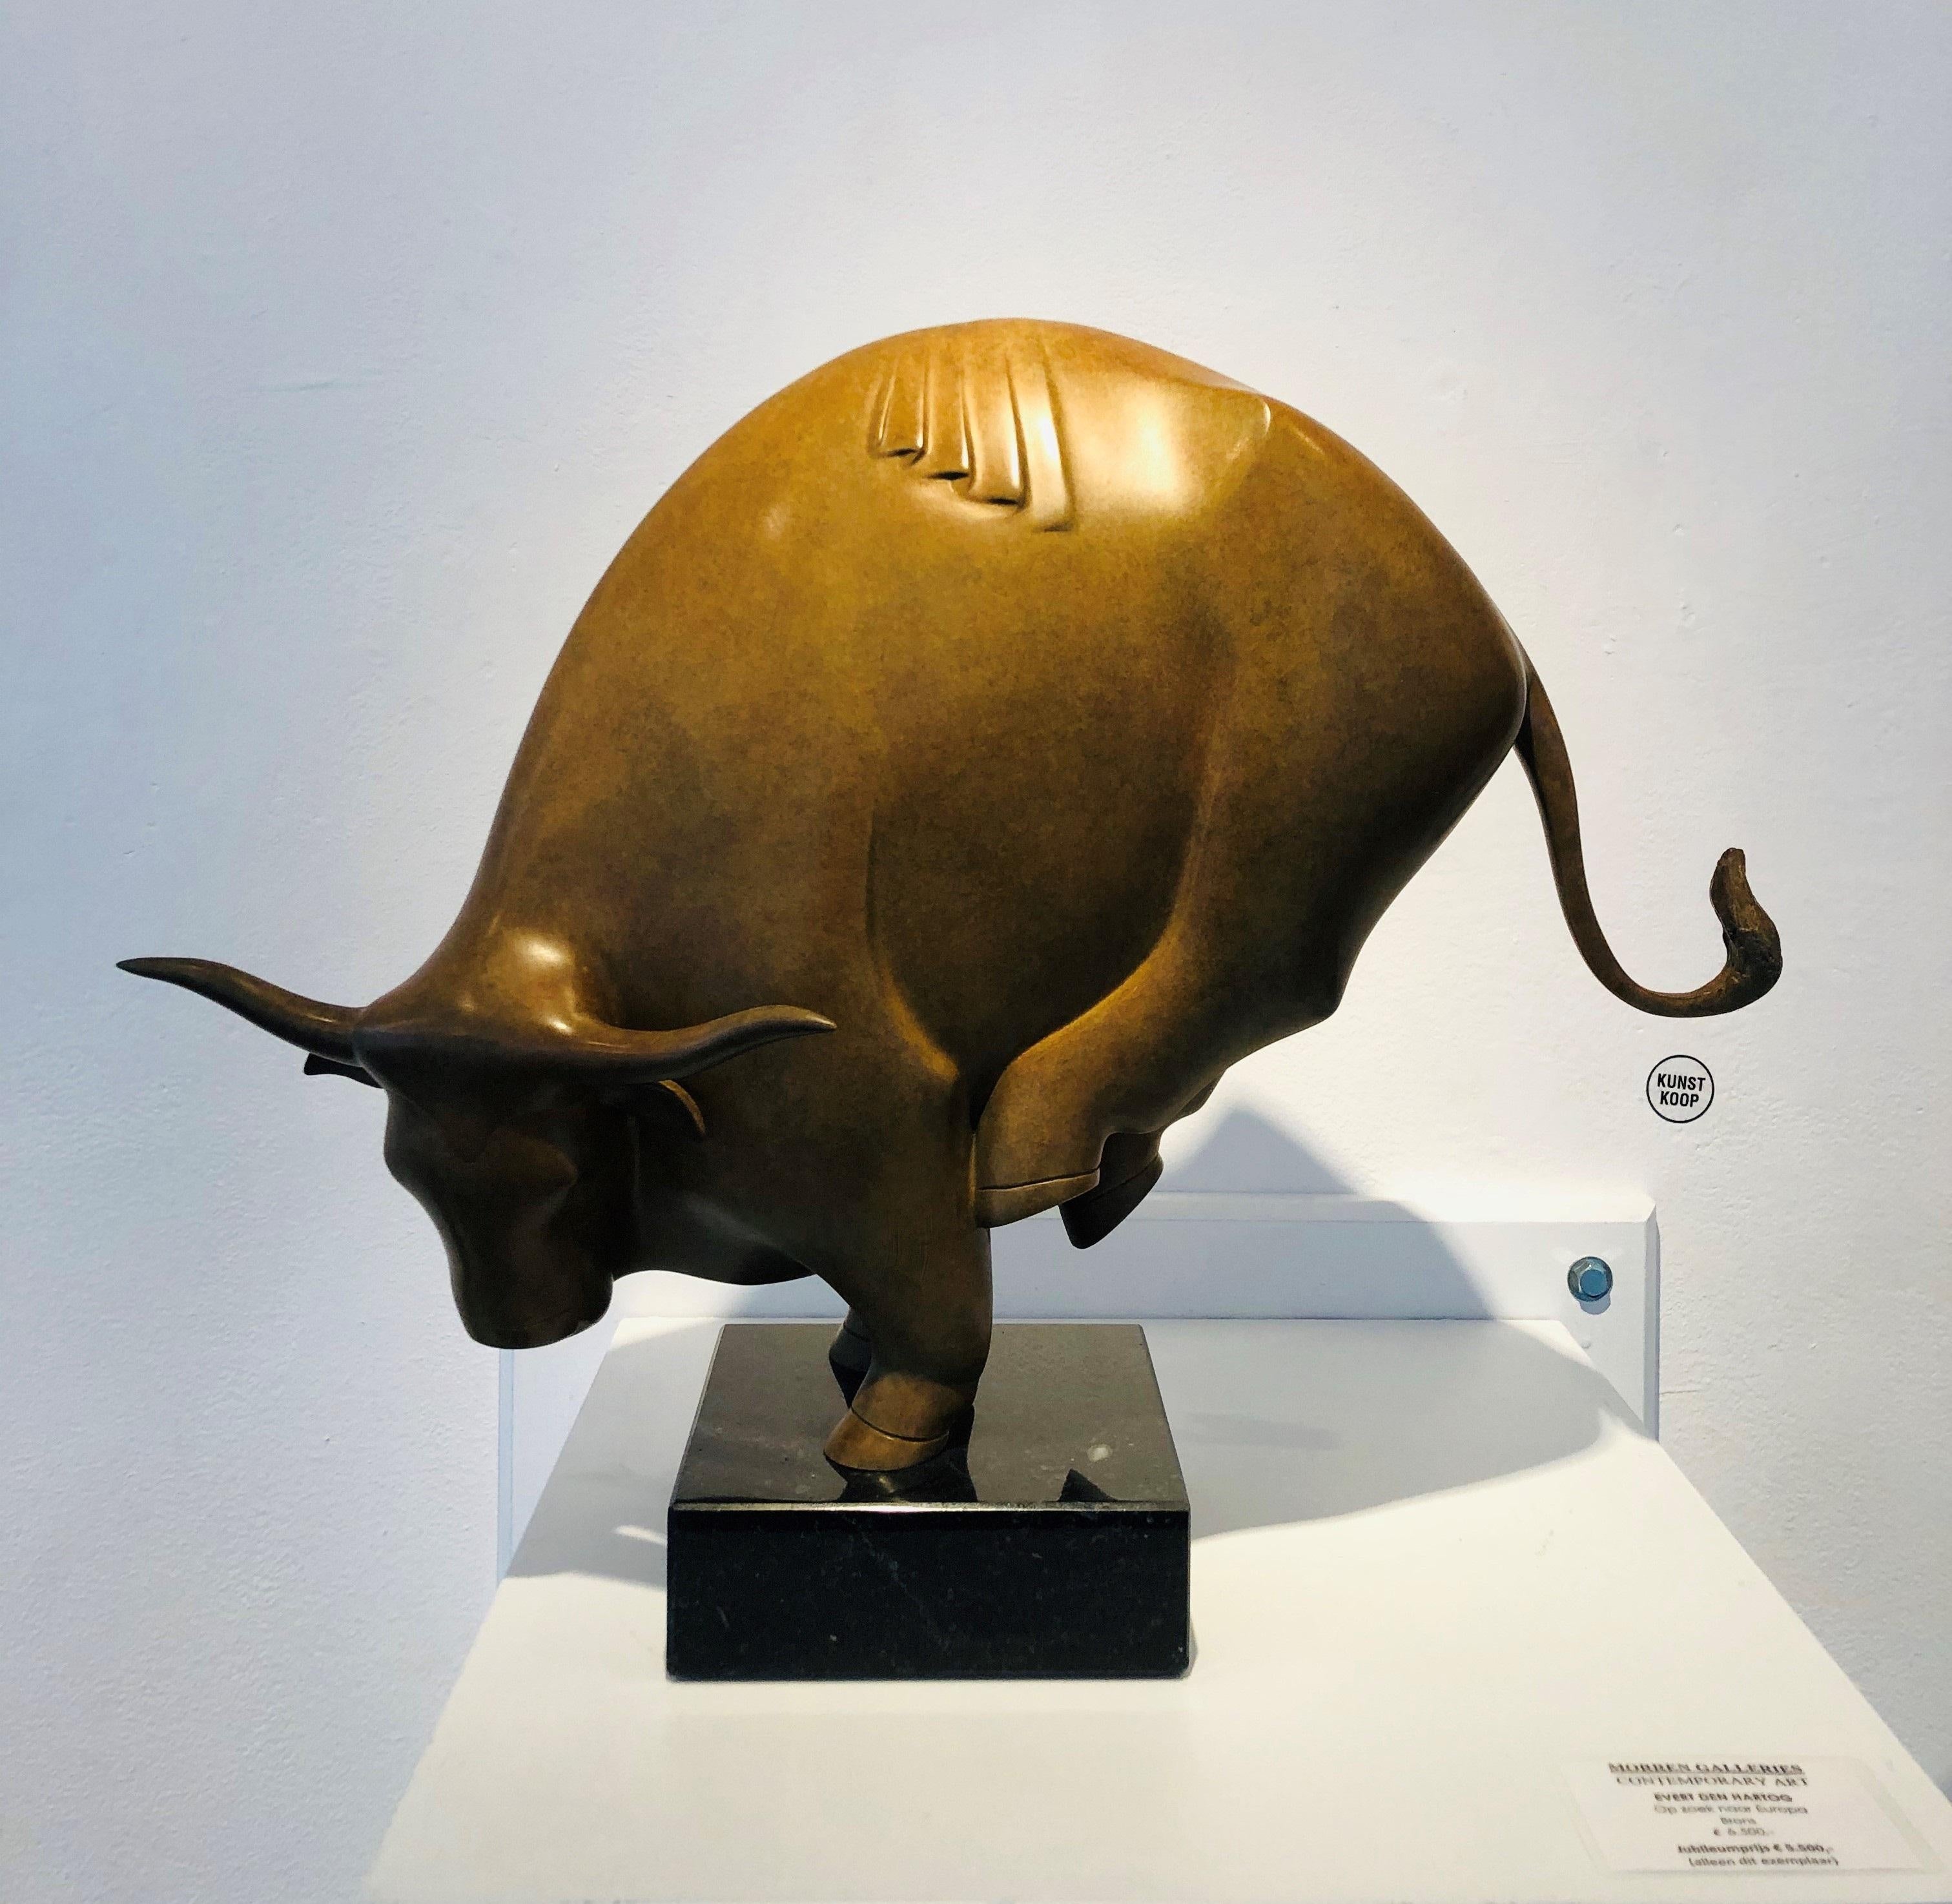 Op zoek naar Europa Looking for Europe Bronze Sculpture Mythology Bull In Stock

Evert den Hartog (born in Groot-Ammers, The Netherlands in 1949) followed his education to be a sculptor at the Rotterdam Academy of Visual Arts. In the years 1971-1976